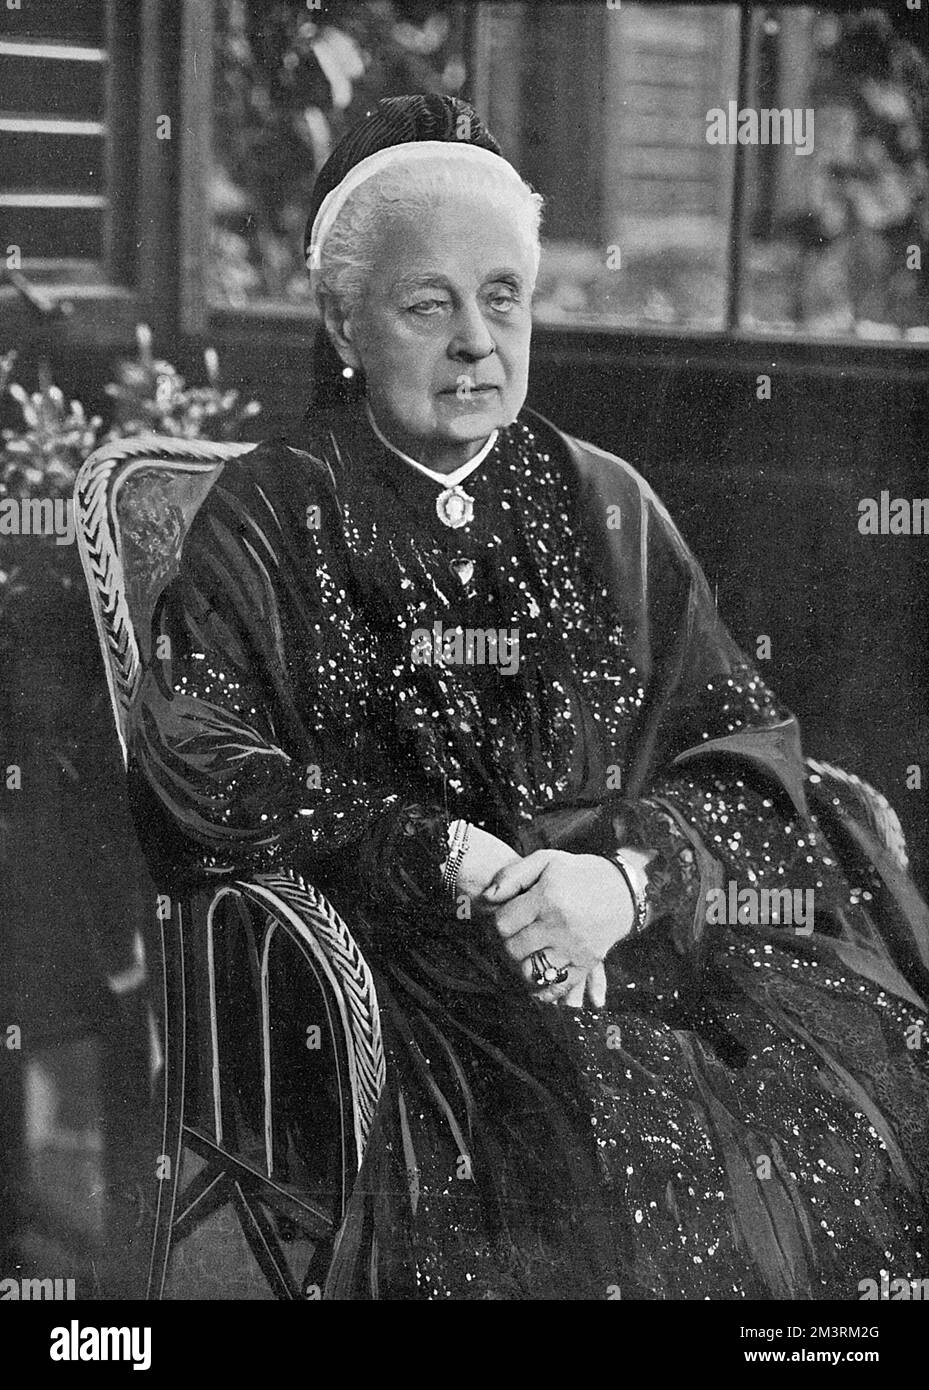 Princess Marie of Saxe-Altenbrug (1818 - 1907), Queen of Hanover and the consort of George V, a grandson of George III of the United Kingdom and Queen Charlotte. Stock Photo